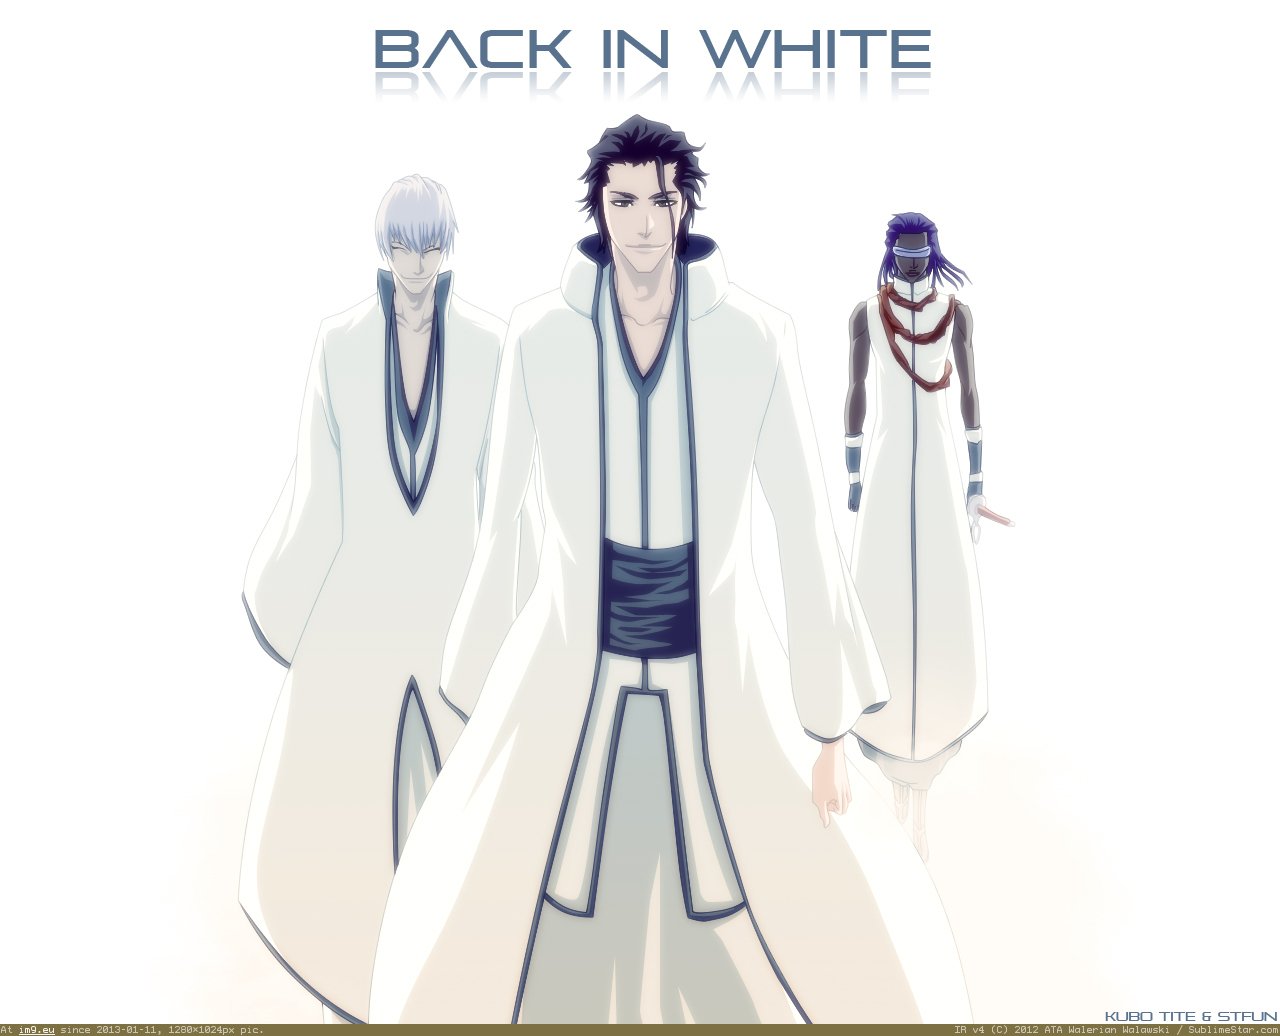 Back In White Epic Bleach Anime 21040651 1280 1024 (anime image) (in Anime wallpapers and pics)